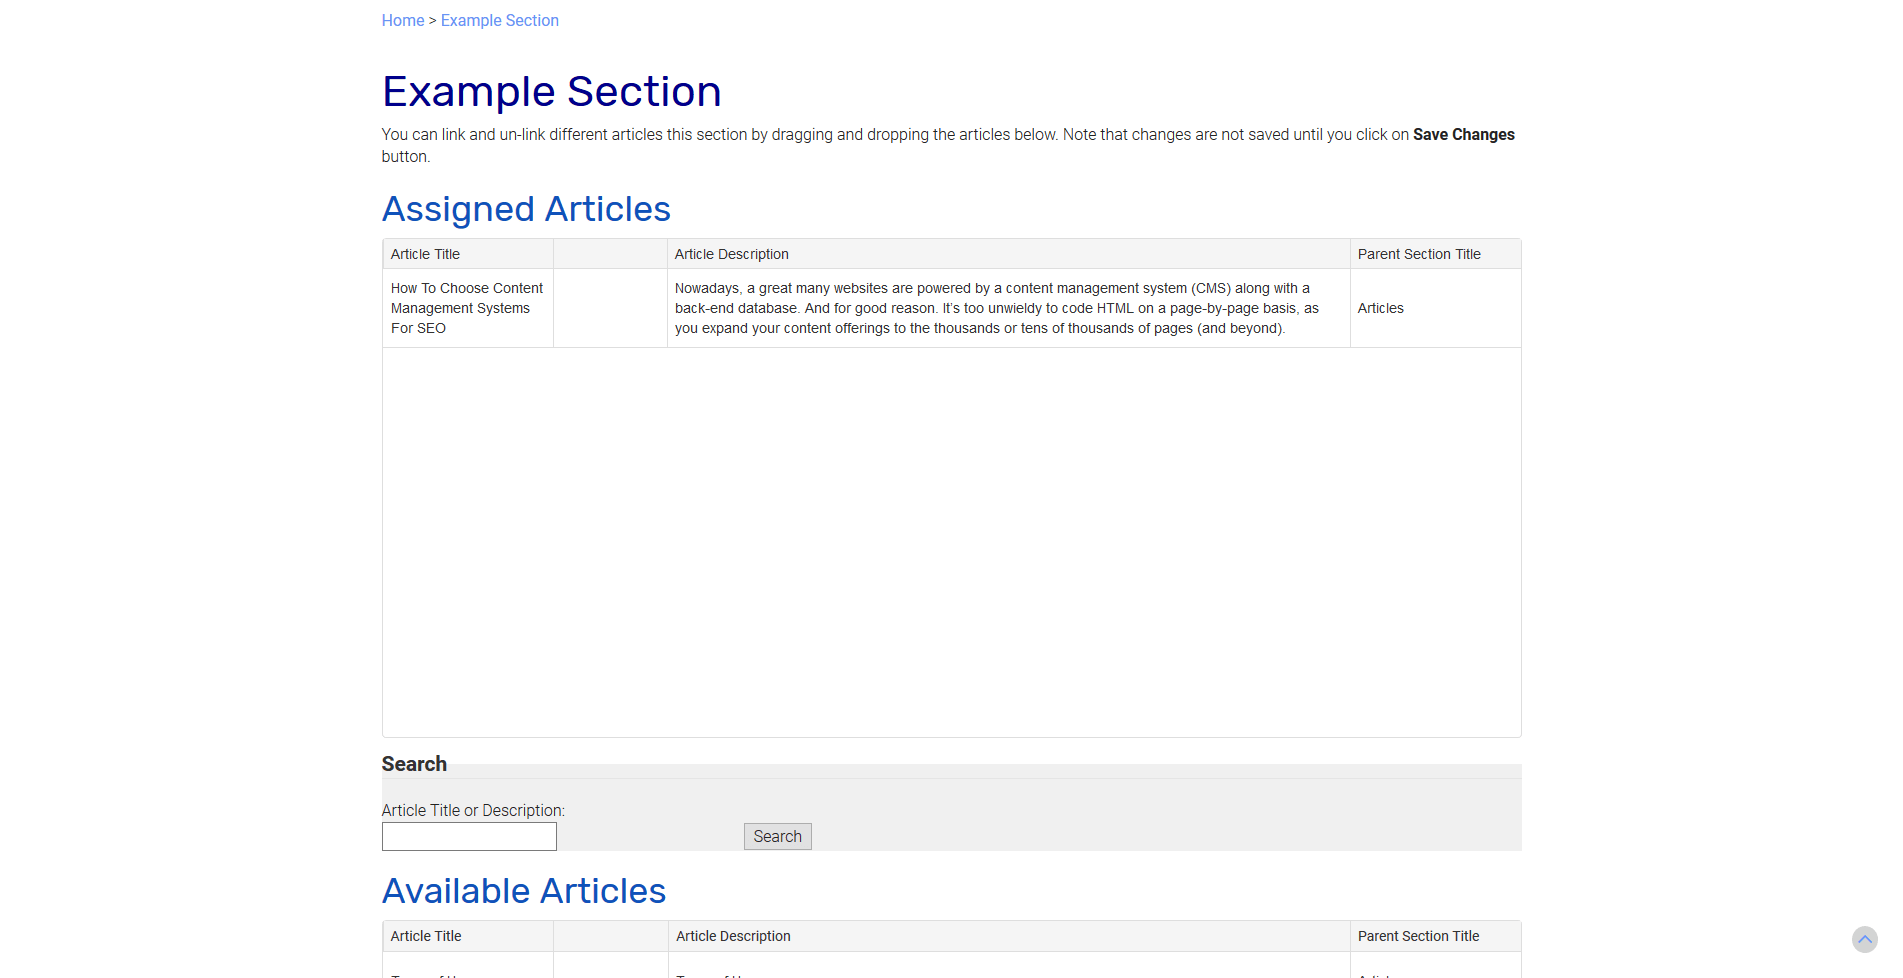 Articles Section-Assign Articles